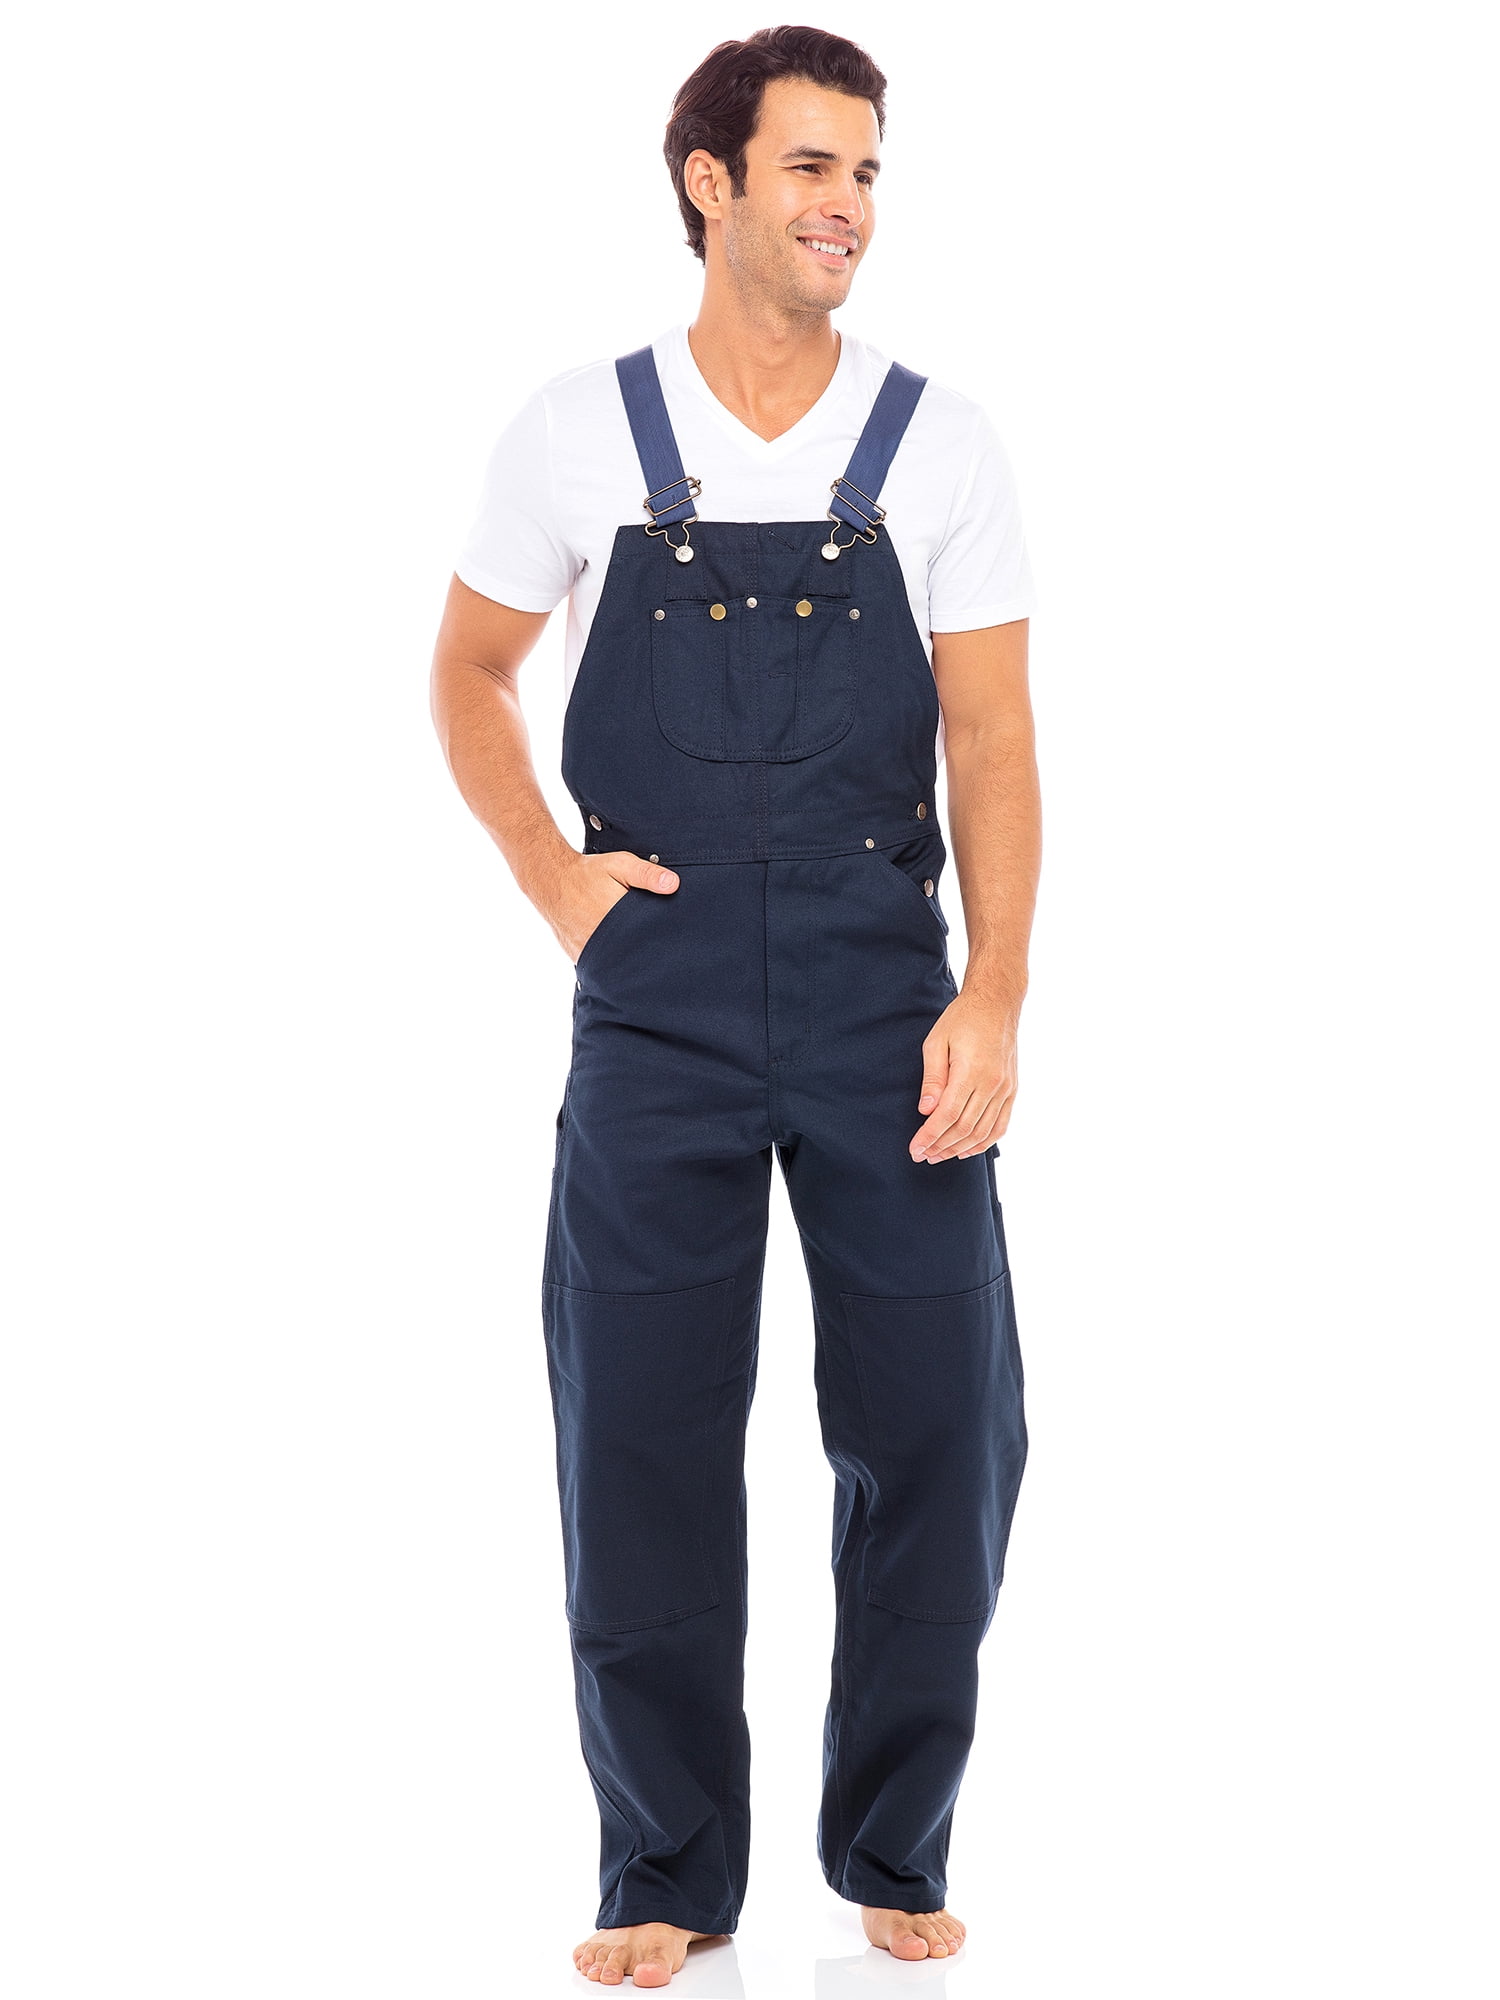 SKYLINEWEARS Mens Duck Bib and Brace Decorators Overalls Work Trousers Heavy Duty Dungarees Unlined 